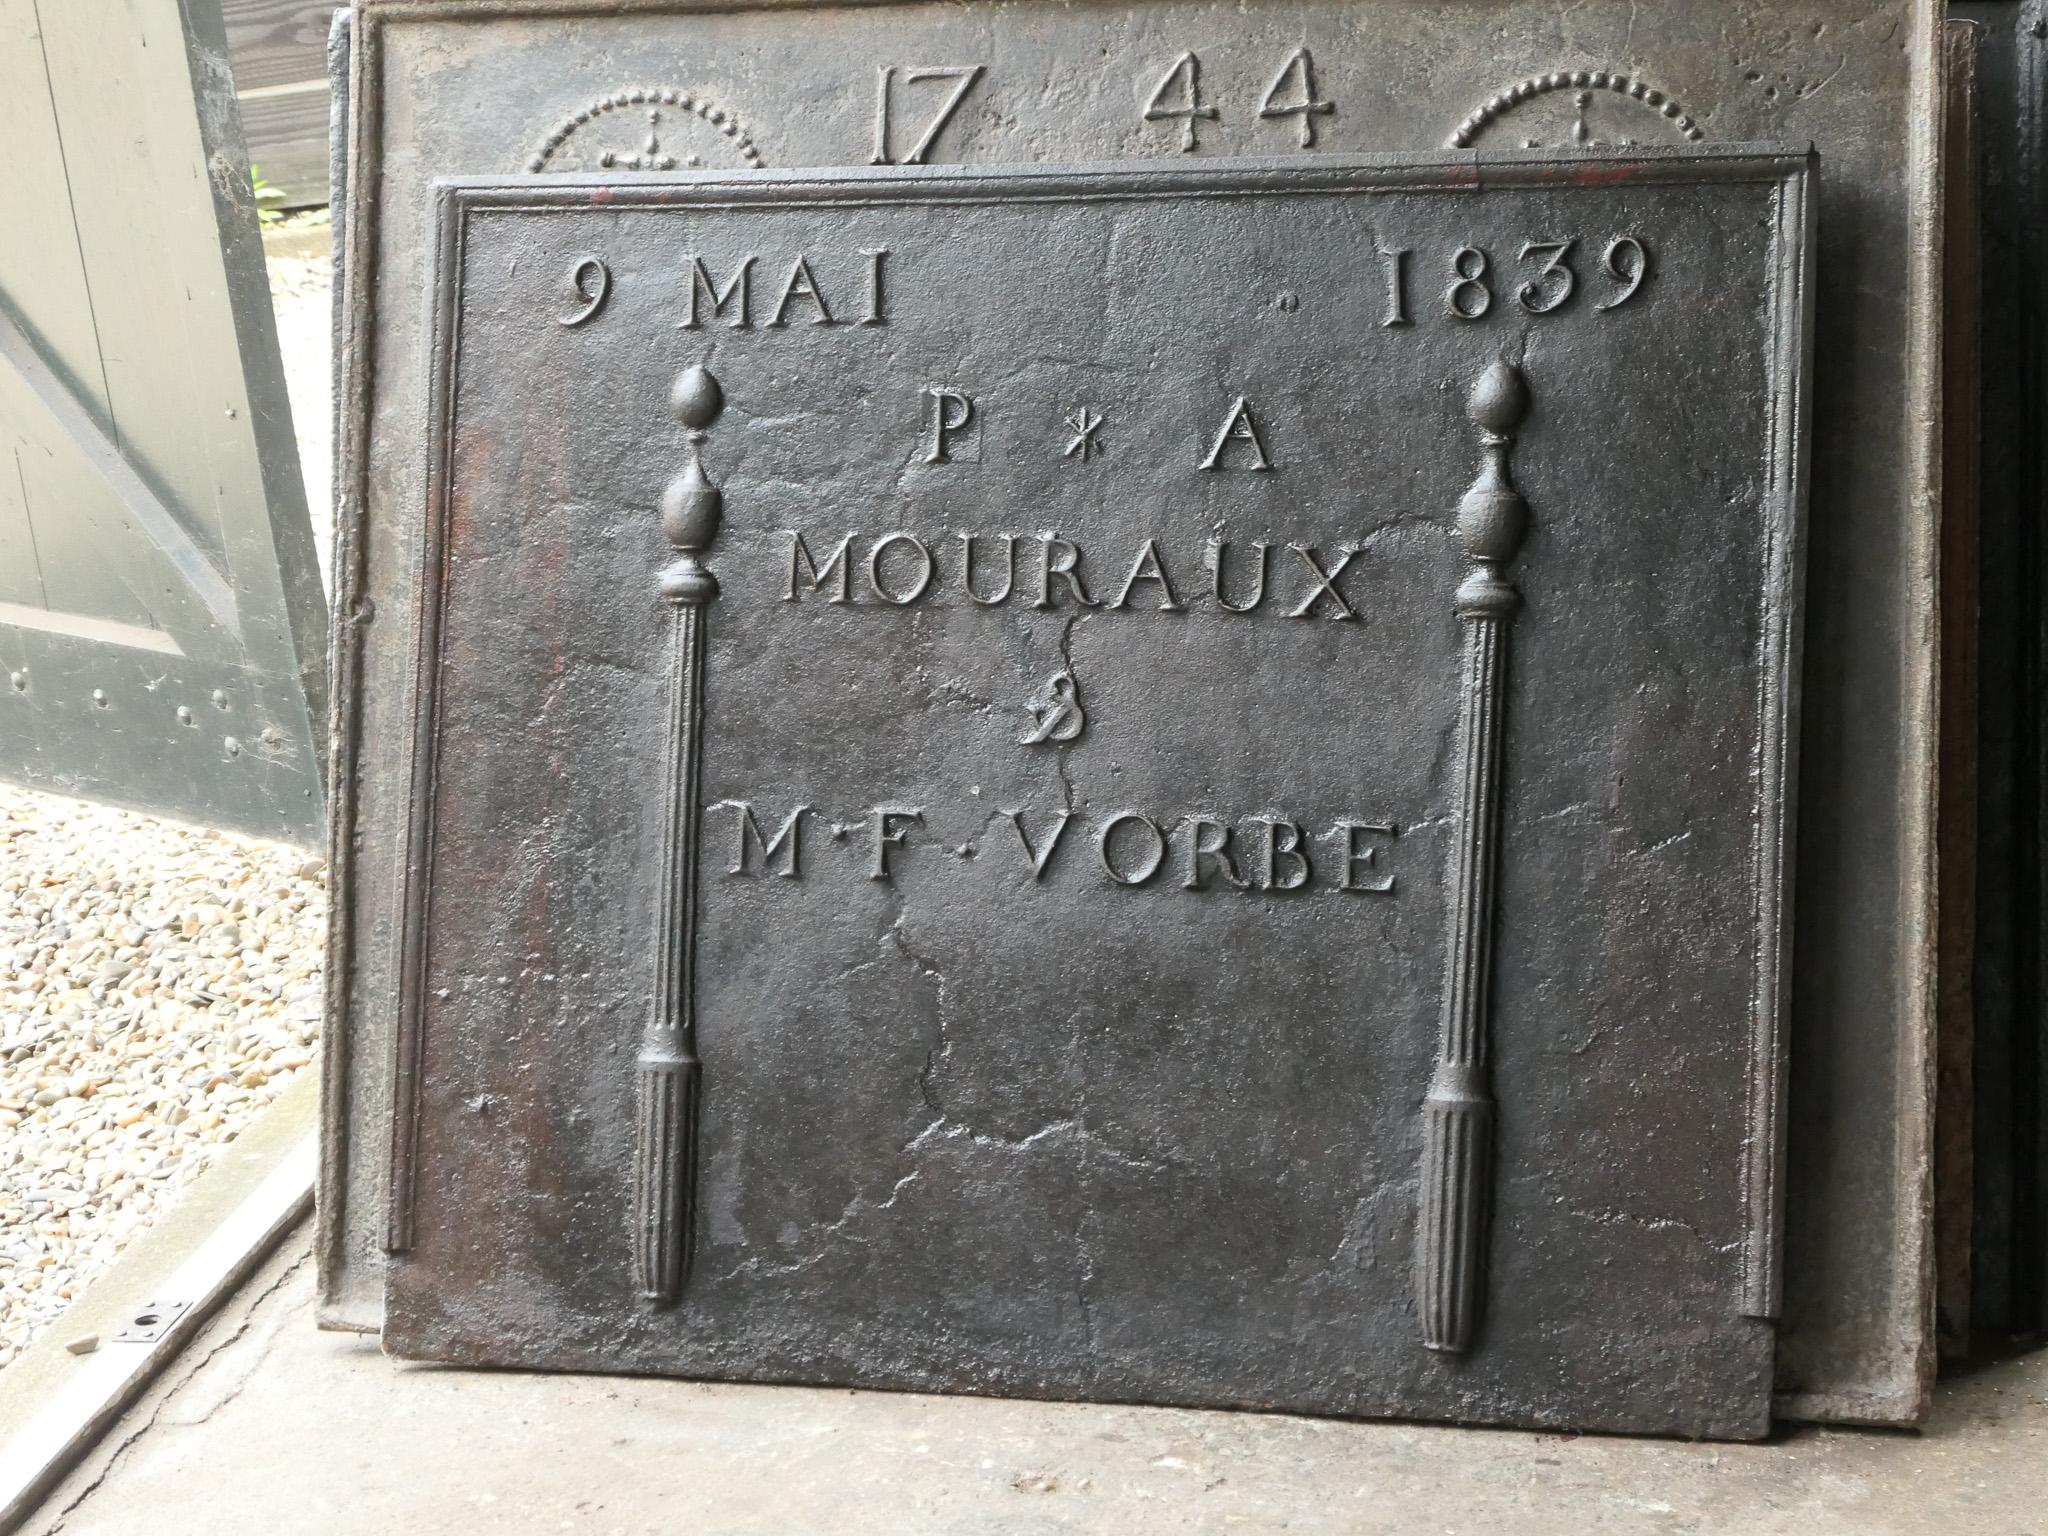 19th century French neoclassical fireplace fireback cast in the honor of the marriage of P.A. Mouraux and M.F. Vorbe in 1839. The two pillars, called the pillars of freedom, symbolize liberty, one of the three values of the French Revolution.

The